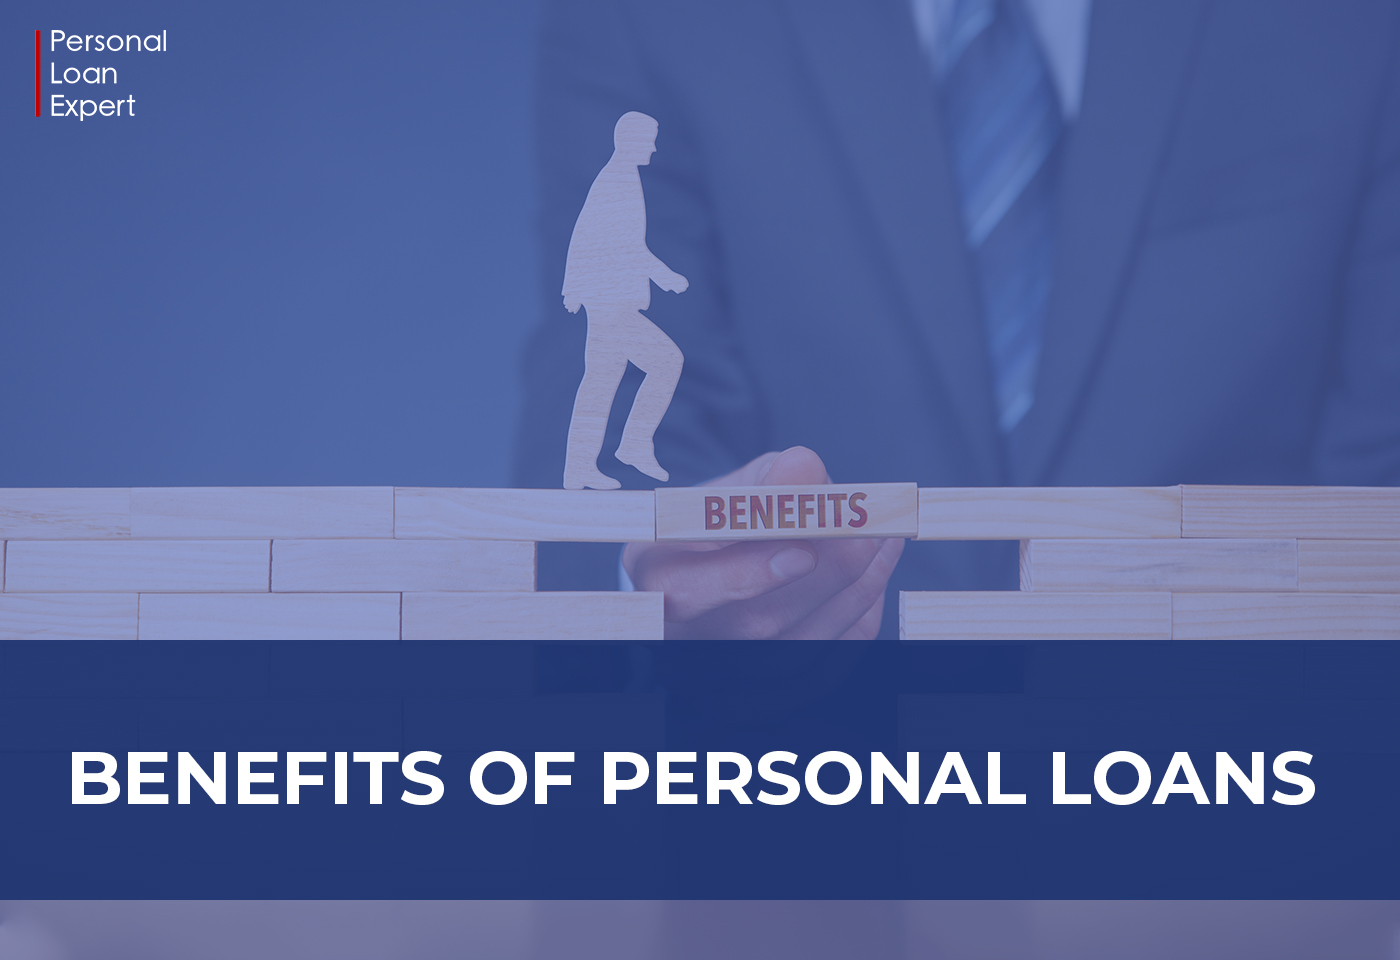 Benefits of Personal loans